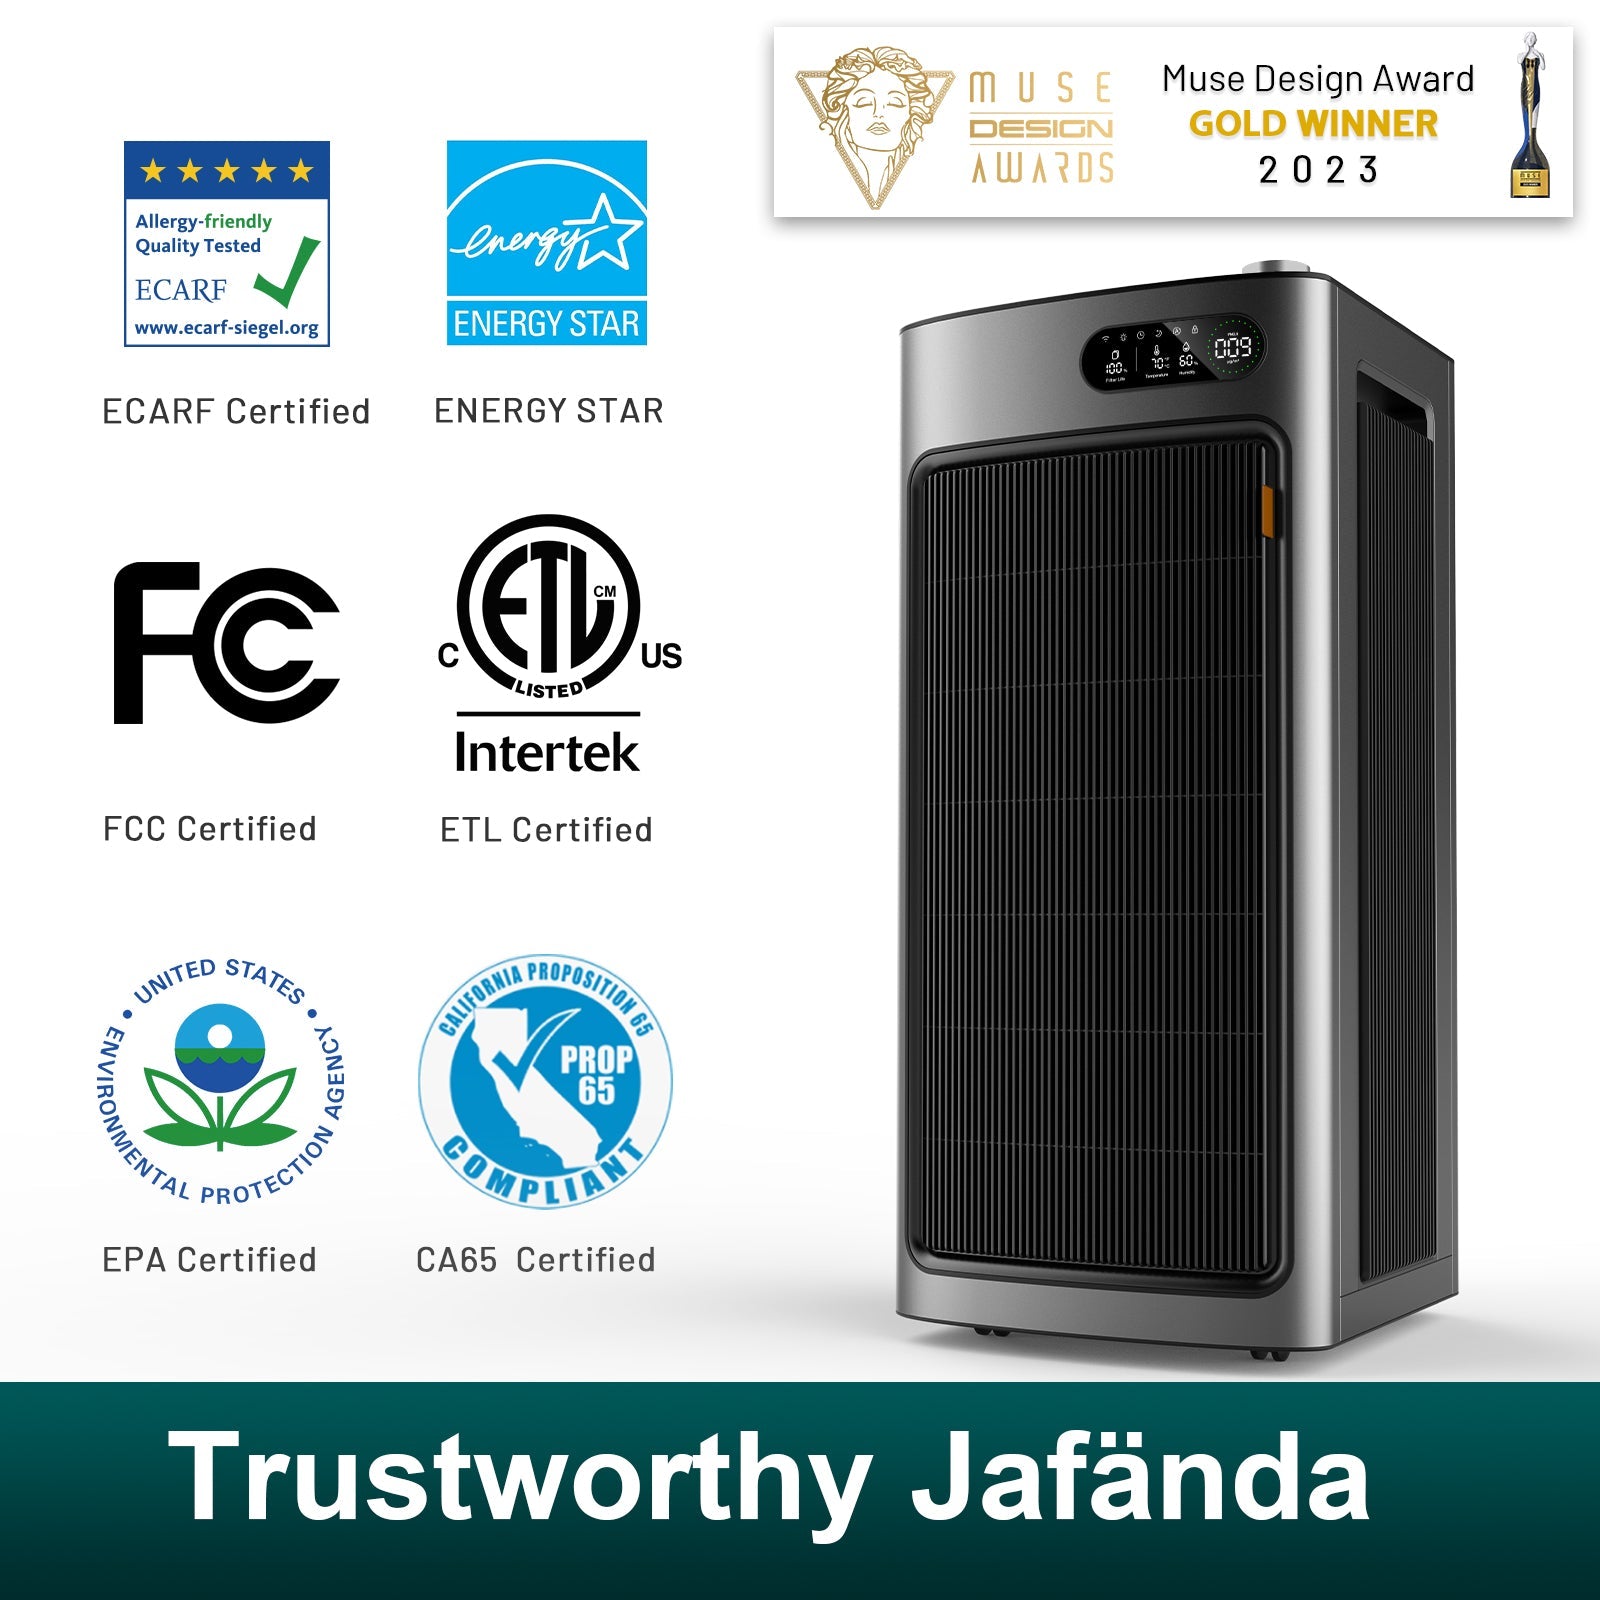 Jafända Smart Air Purifier for Large Room 6862 sq ft, Dual Filtration with HEPA & Activated Carbon Filters, Air Cleaner Removes Dust, Pollen, Smoke, mold, Allergies, Odors, Pet Dander, VOCs, APP & Alexa - Jafanda